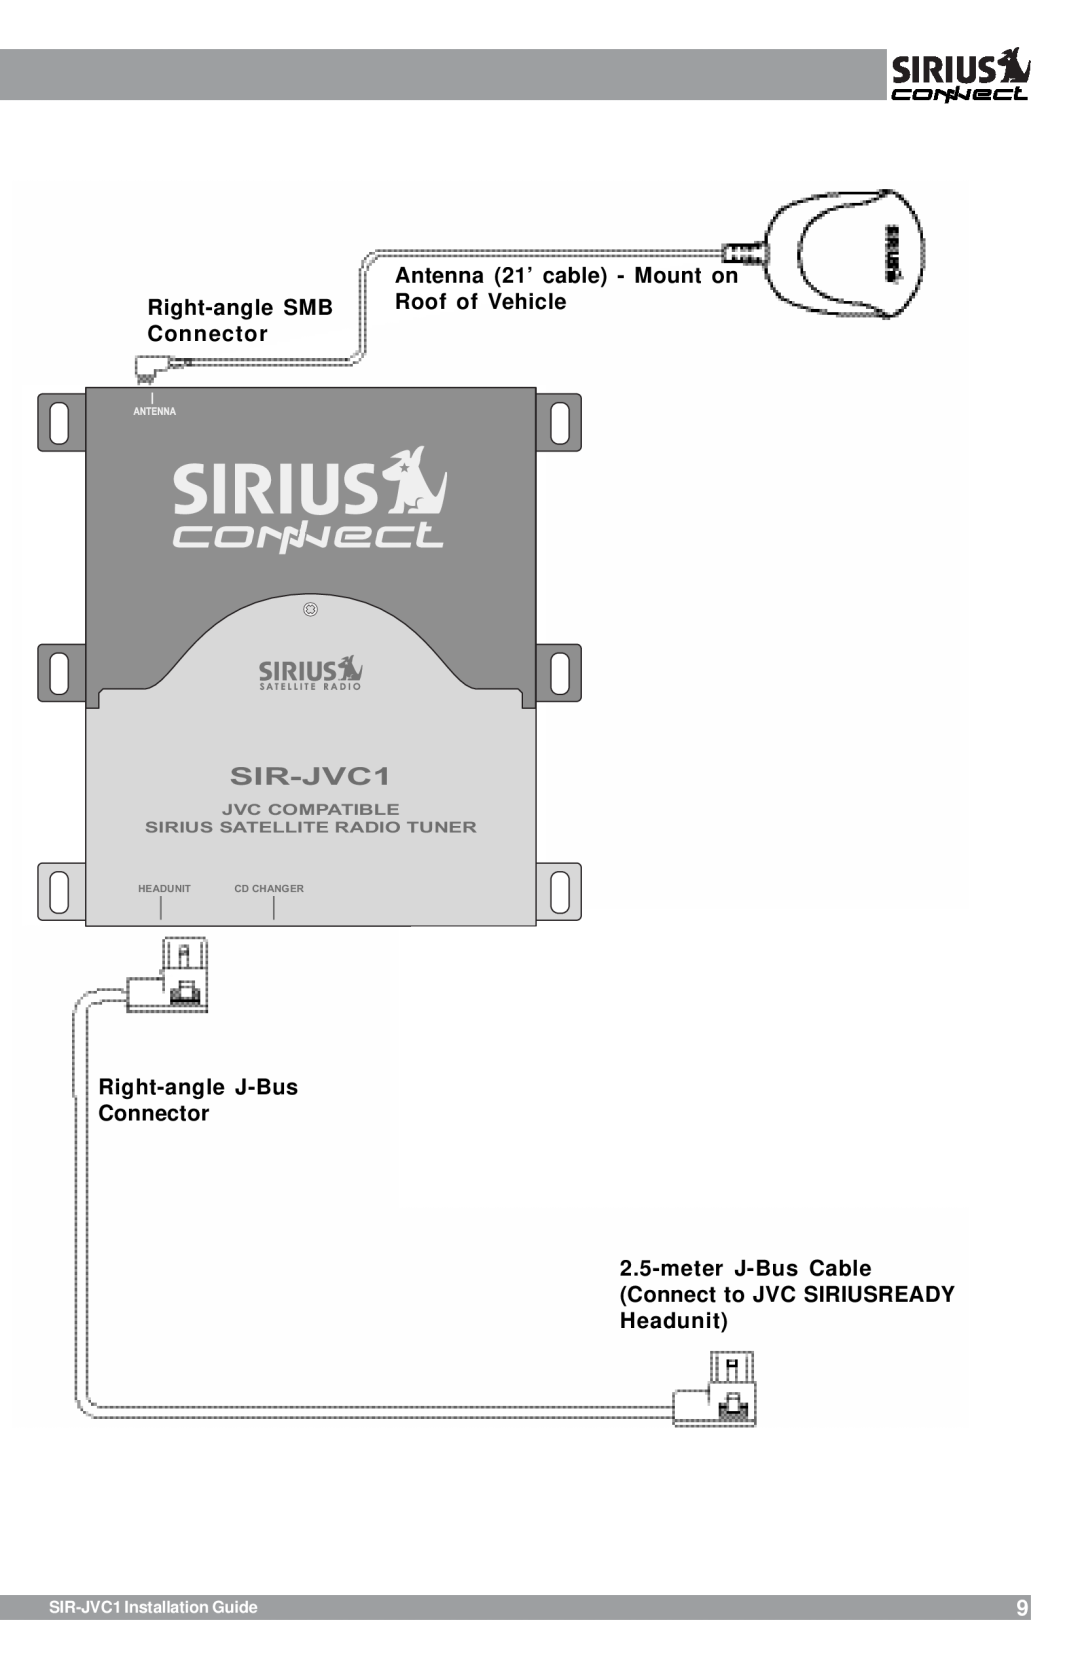 Sirius Satellite Radio SIR-JVC1 manual Antenna 21’ cable - Mount on, Right-angleSMB Roof of Vehicle Connector, Headunit 